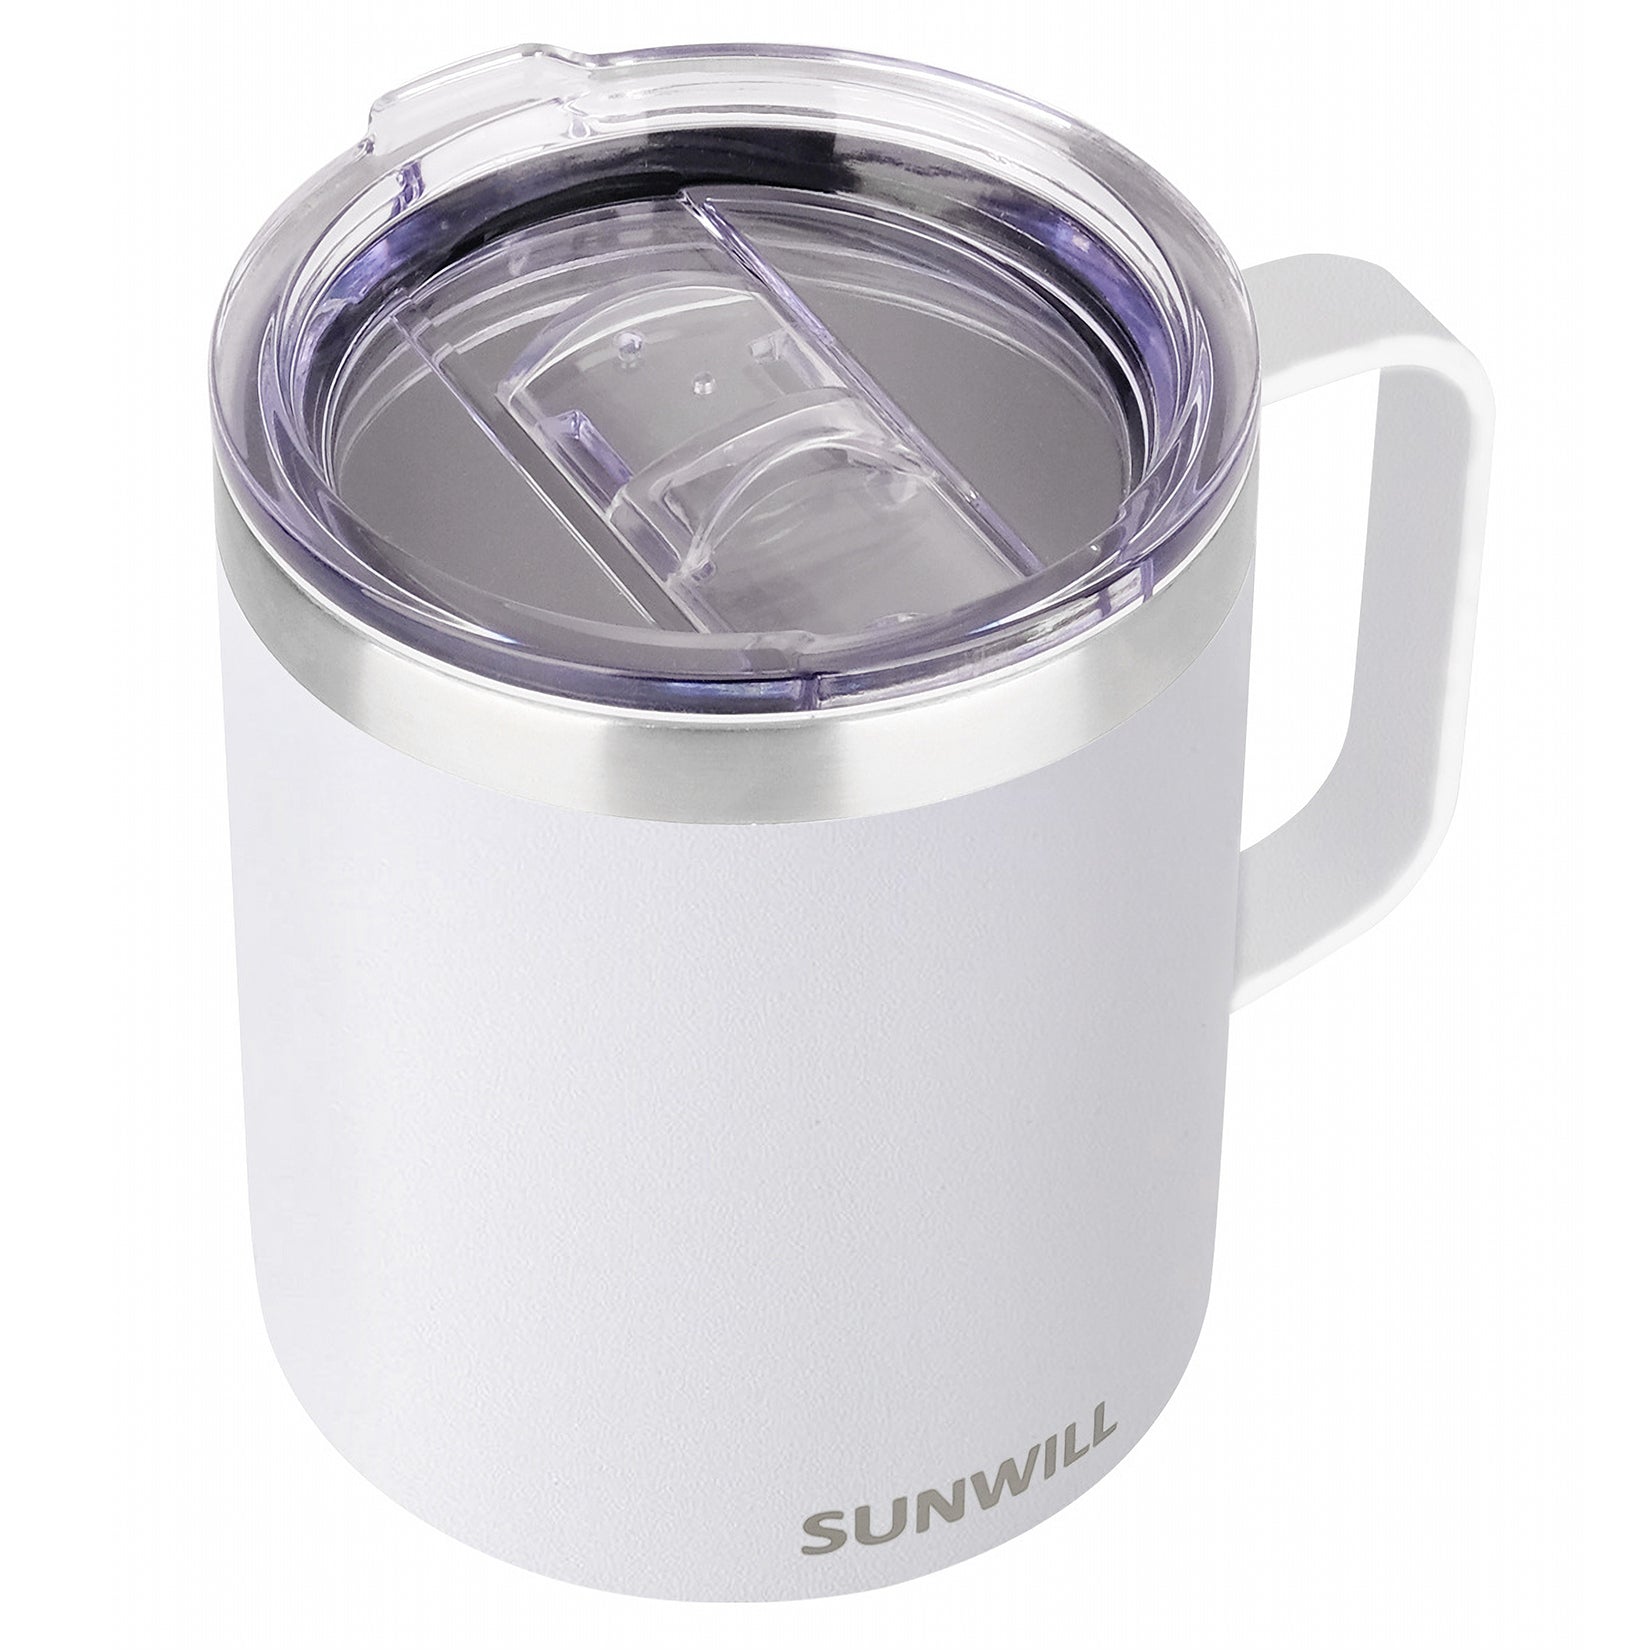 Stainless Steel Coffee Mug with Handle and Lid Insulated Travel